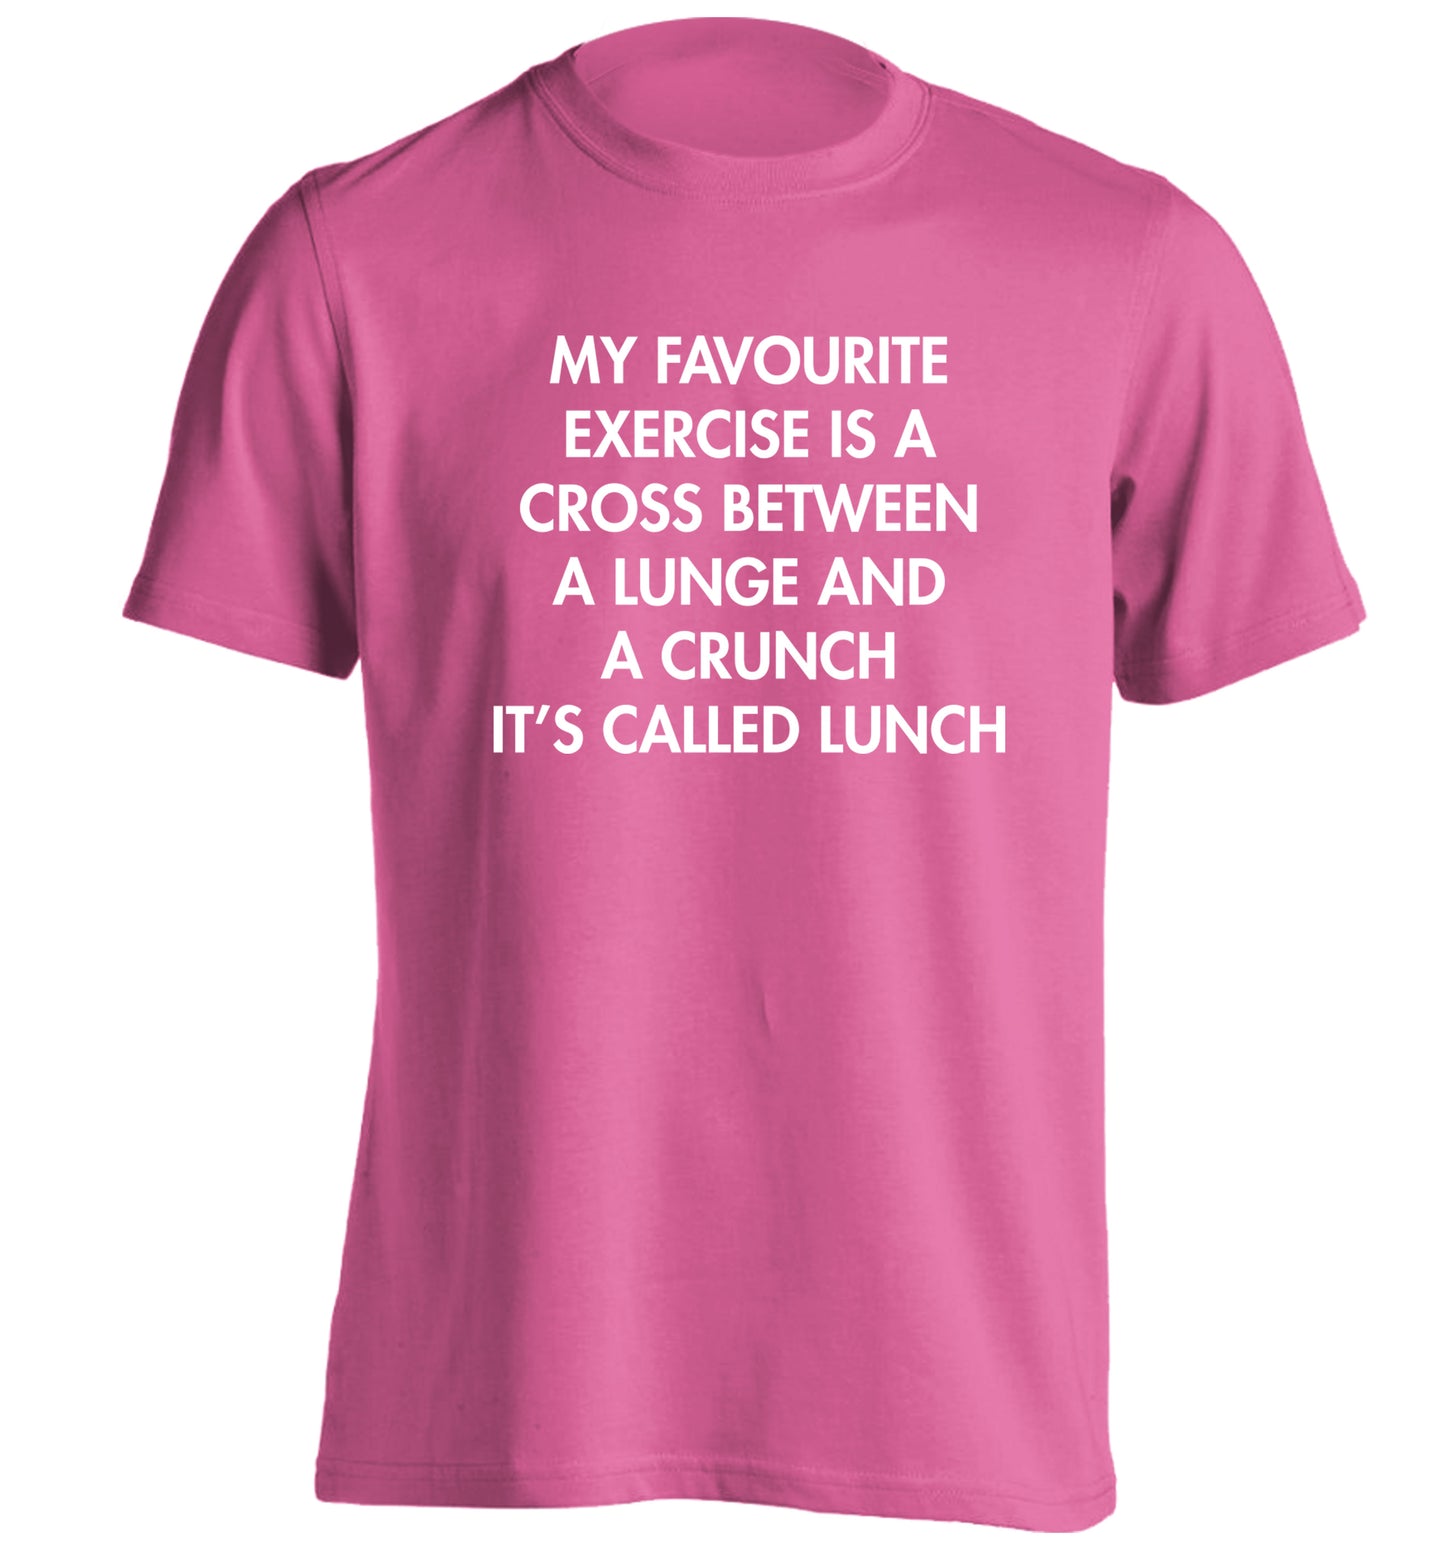 My favourite exercise is a cross between a lung and a crunch it's called lunch adults unisex pink Tshirt 2XL